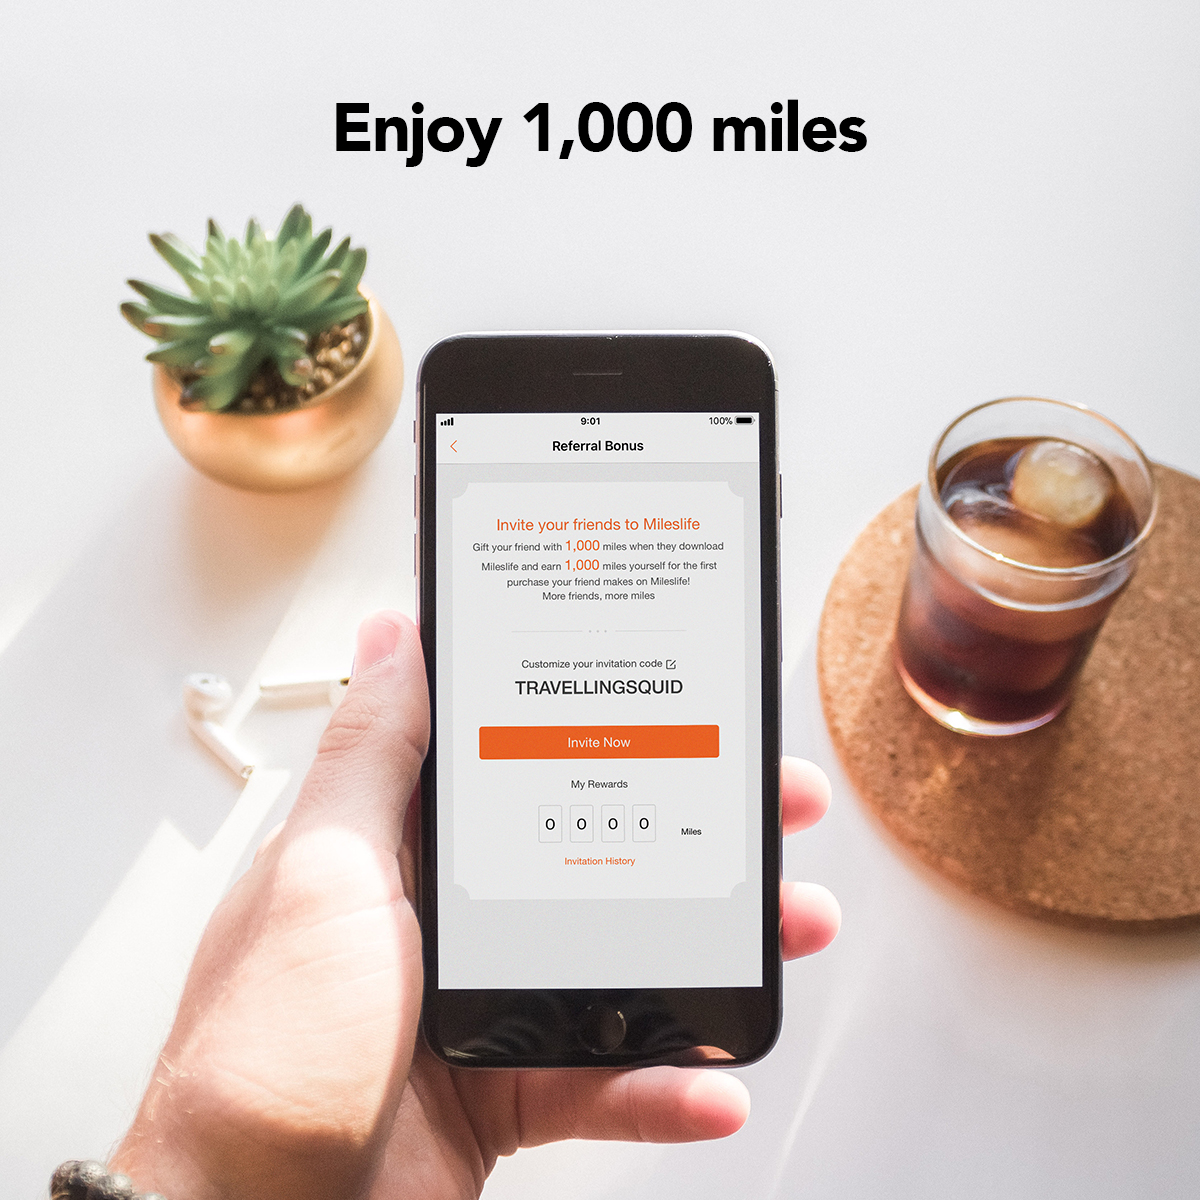 mileslife review 1000 miles frequent flyer referral